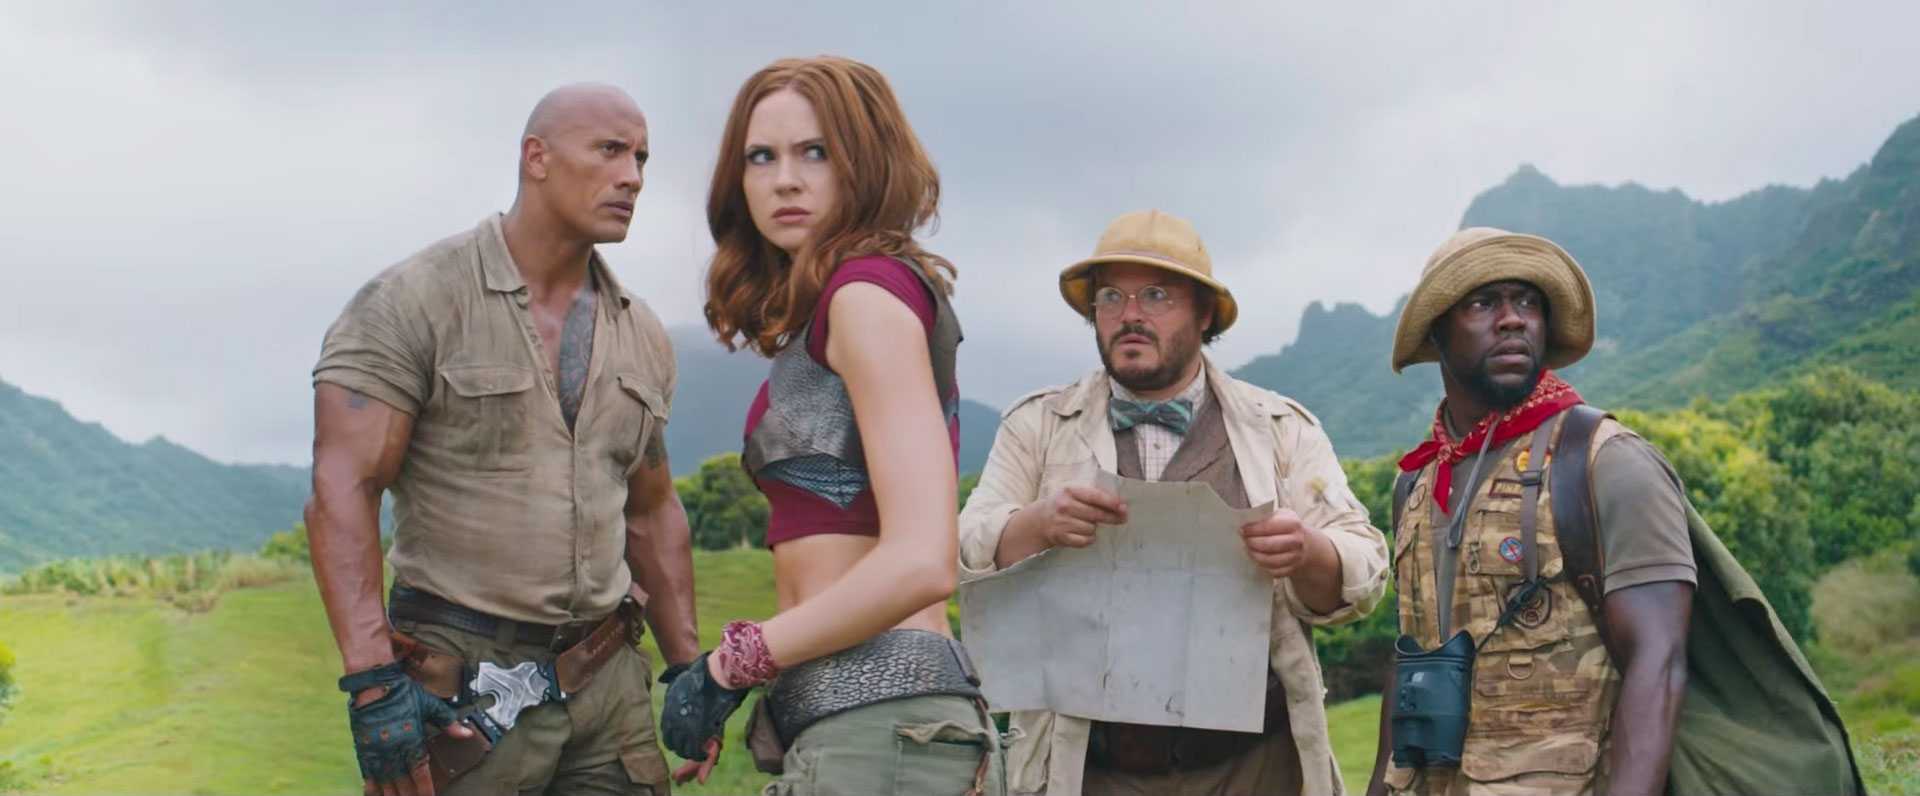 download the last version for apple Jumanji: Welcome to the Jungle